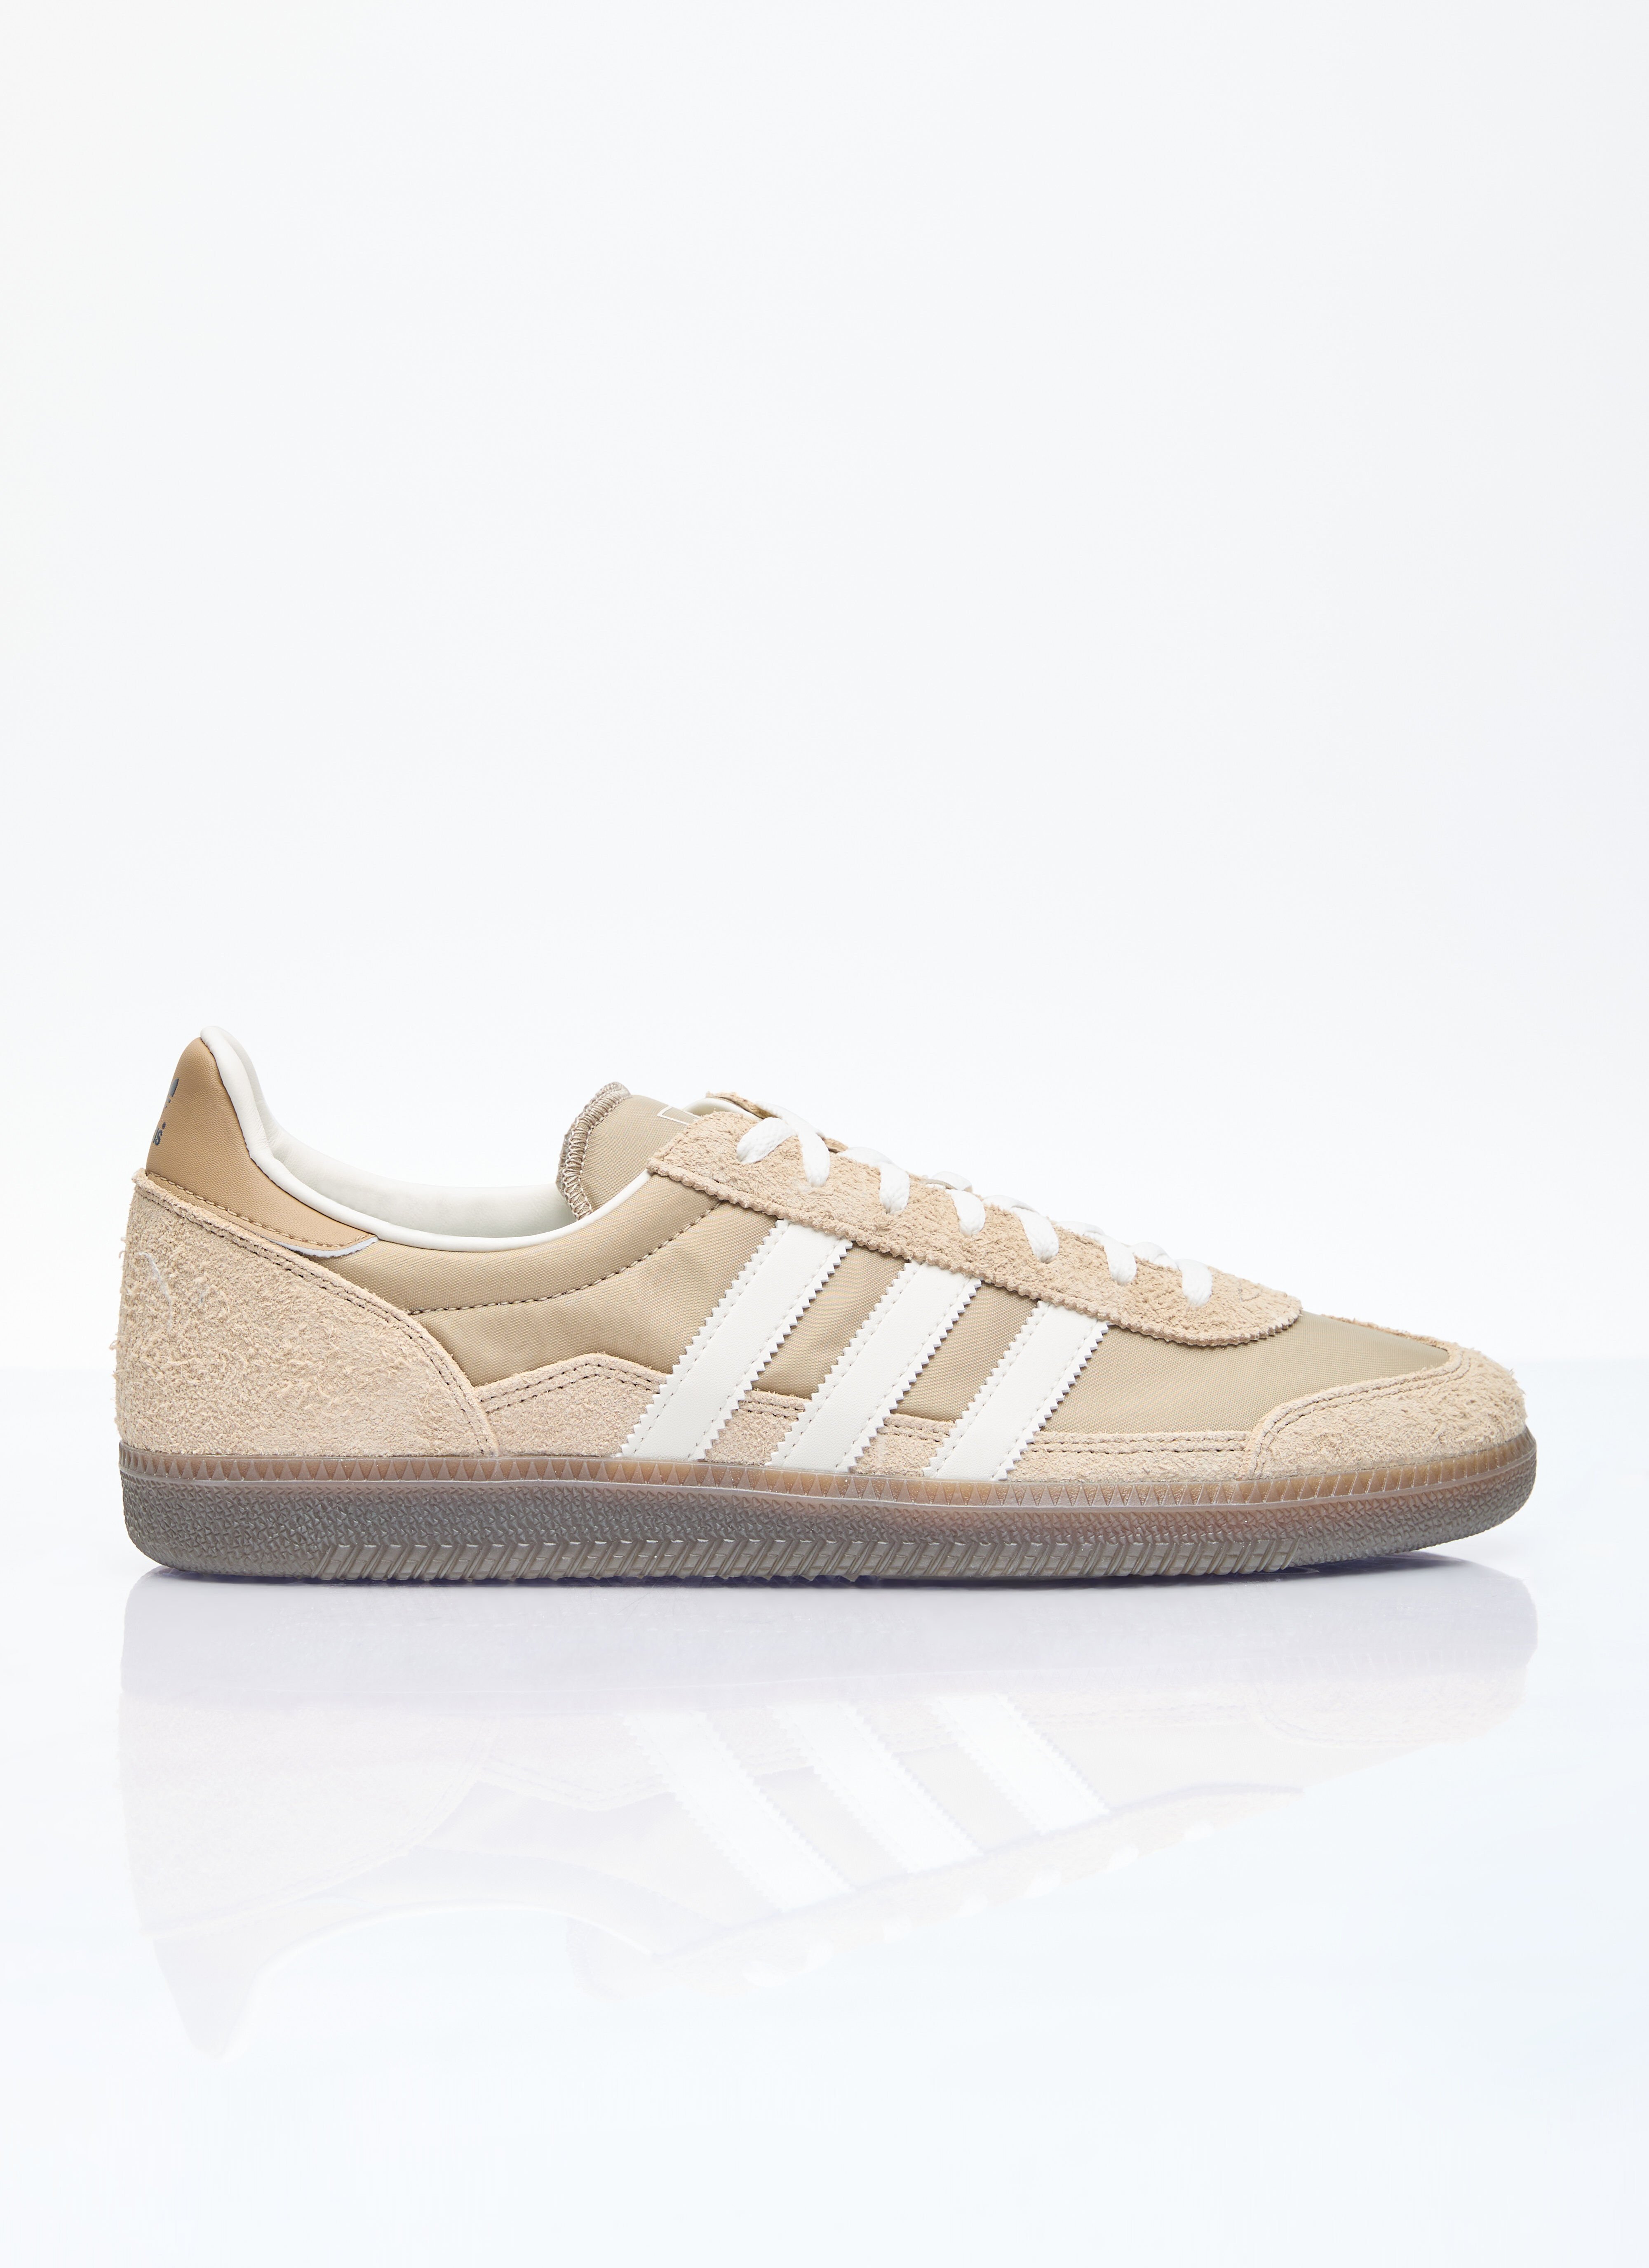 adidas by Wales Bonner Wensley Spzl Sneakers Yellow awb0357010